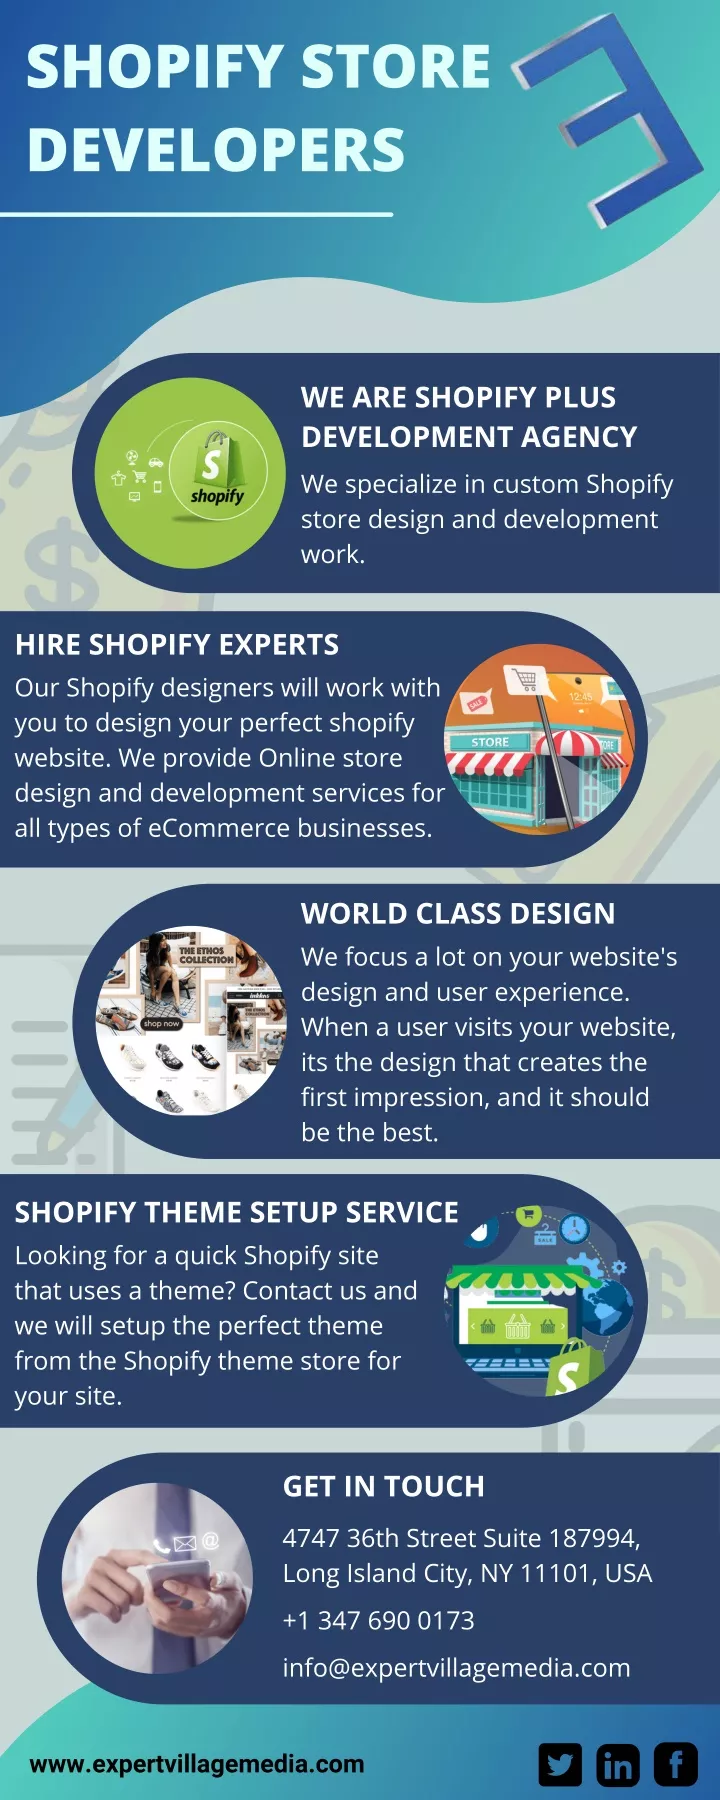 shopify store developers